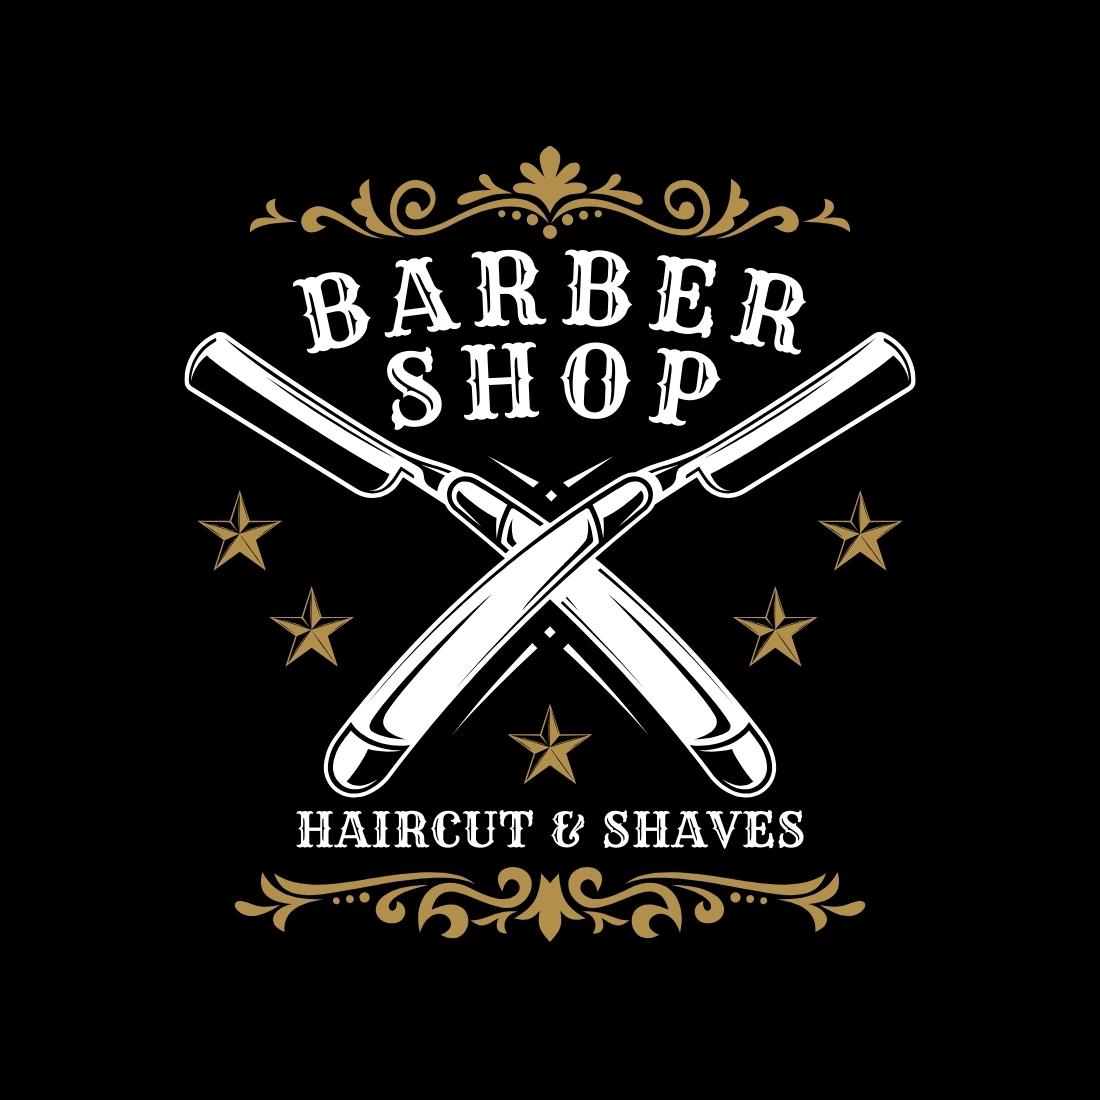 The Barber Shop – Student Project Game